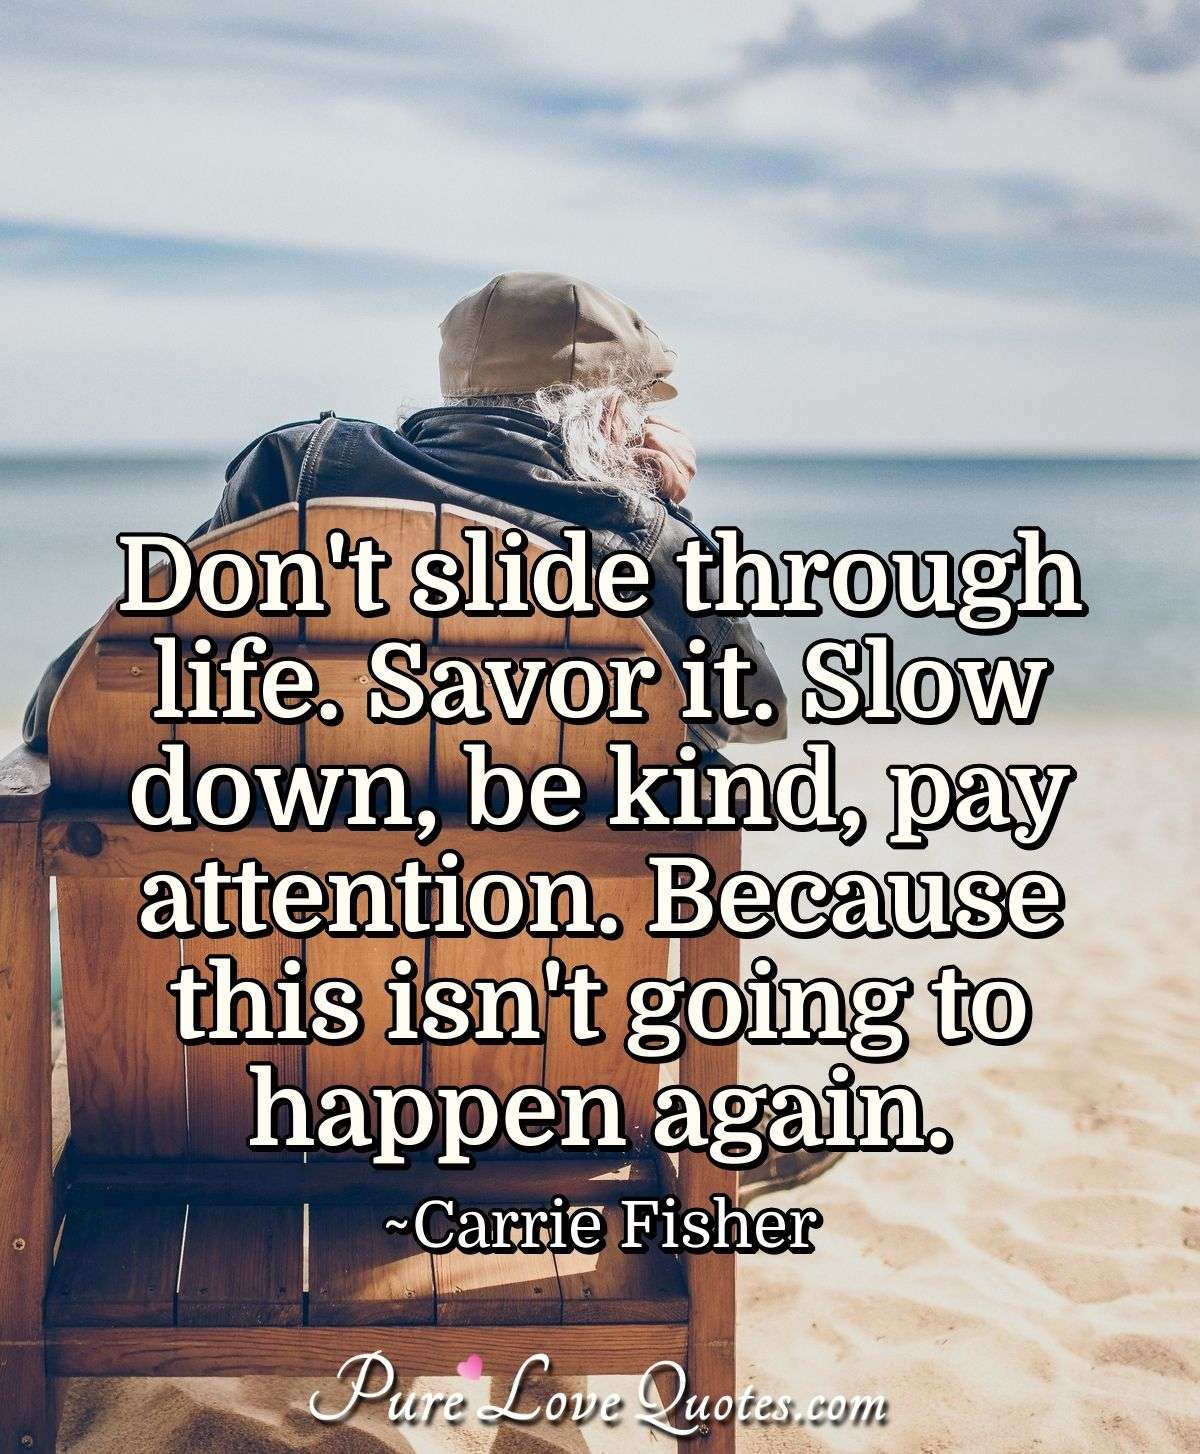 Don't slide through life. Savor it. Slow down, be kind, pay attention. Because this isn't going to happen again. - Carrie Fisher